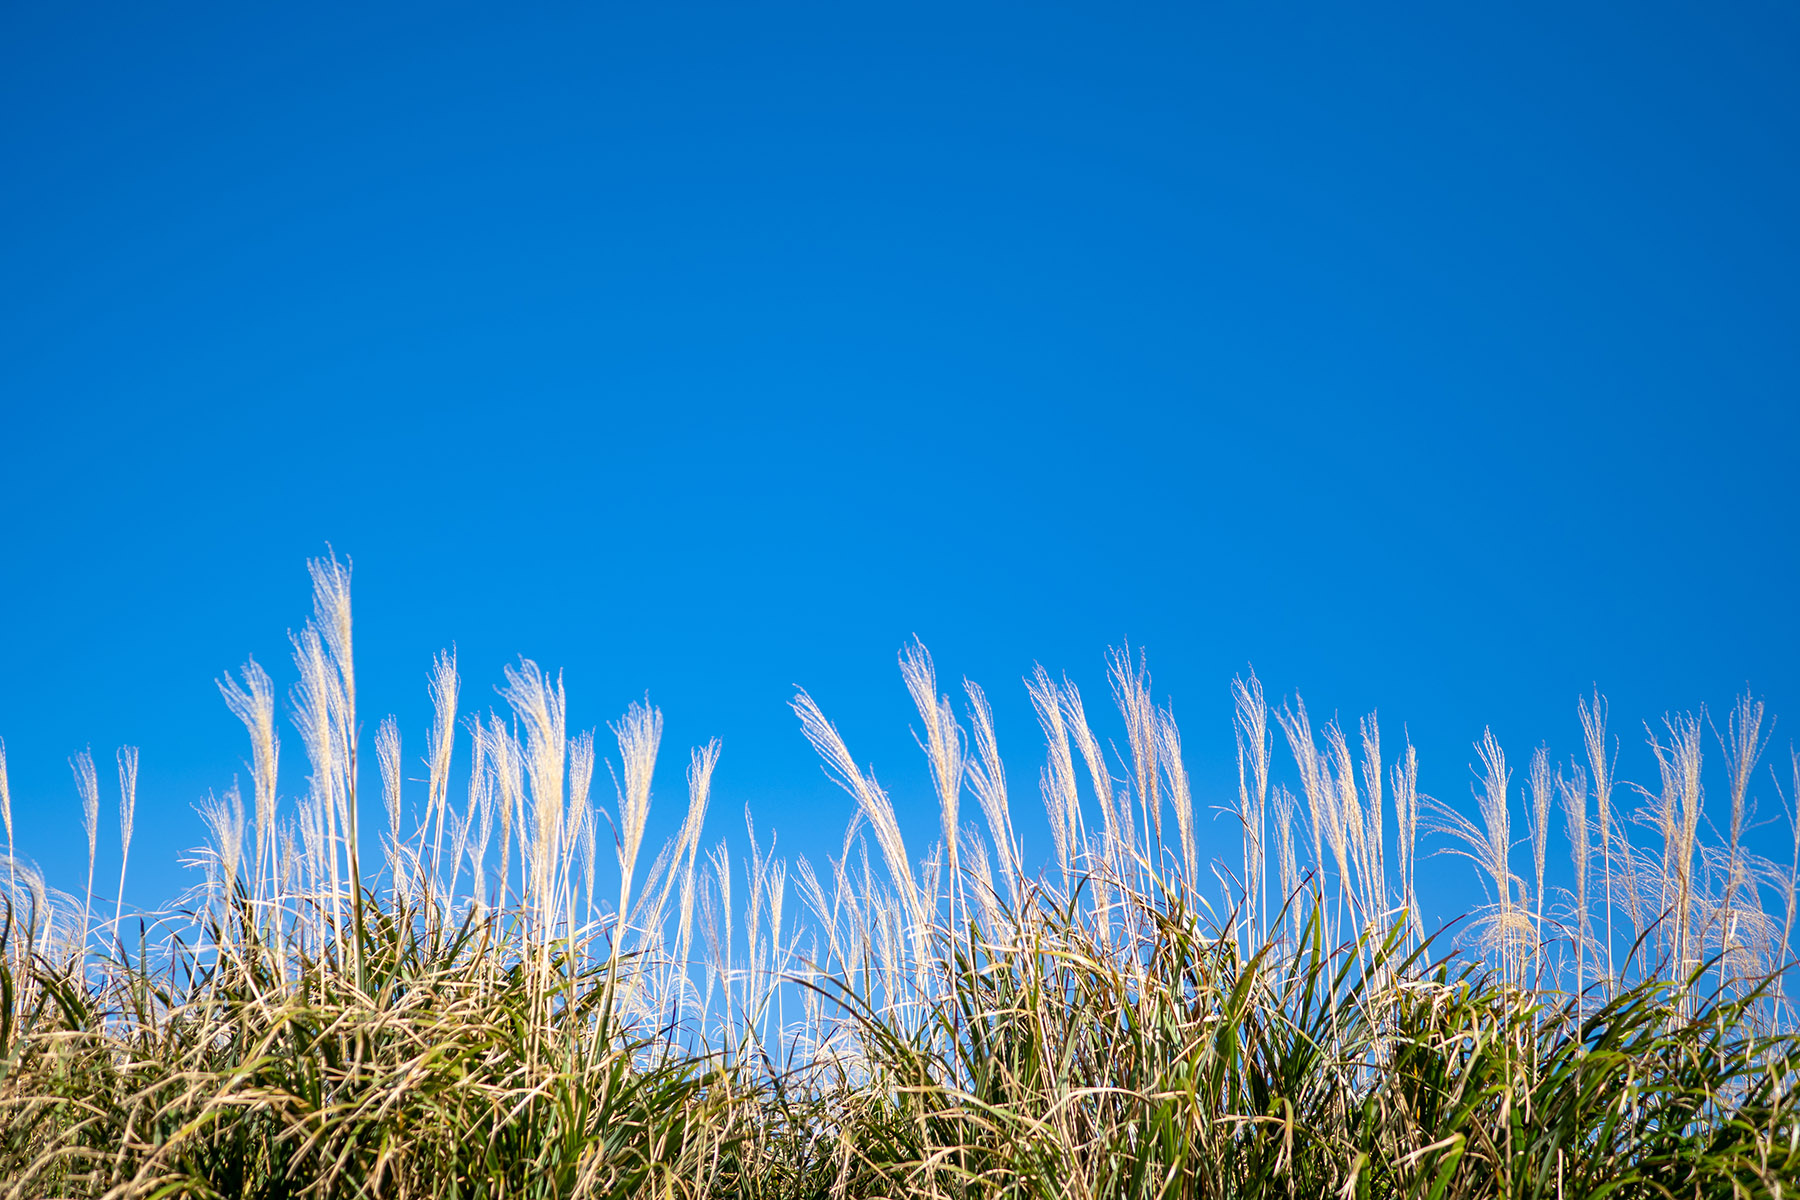 Image shows a field of miscanthus grass against a bright blue sky.